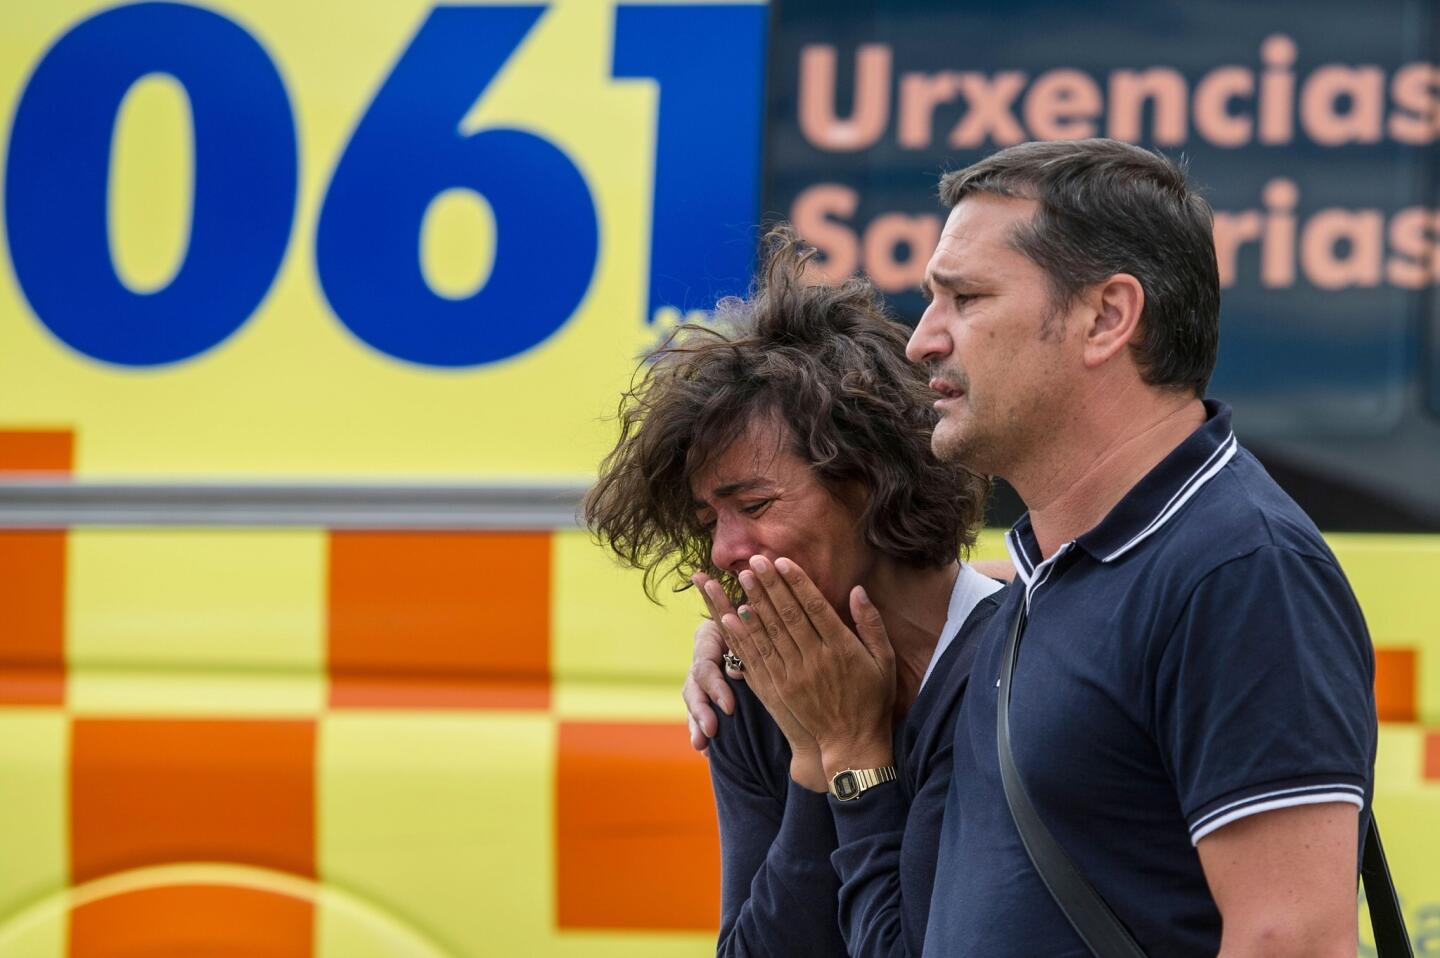 Relatives of passengers involved in the train crash wait for news at the Cersia Building in Santiago de Compostela.